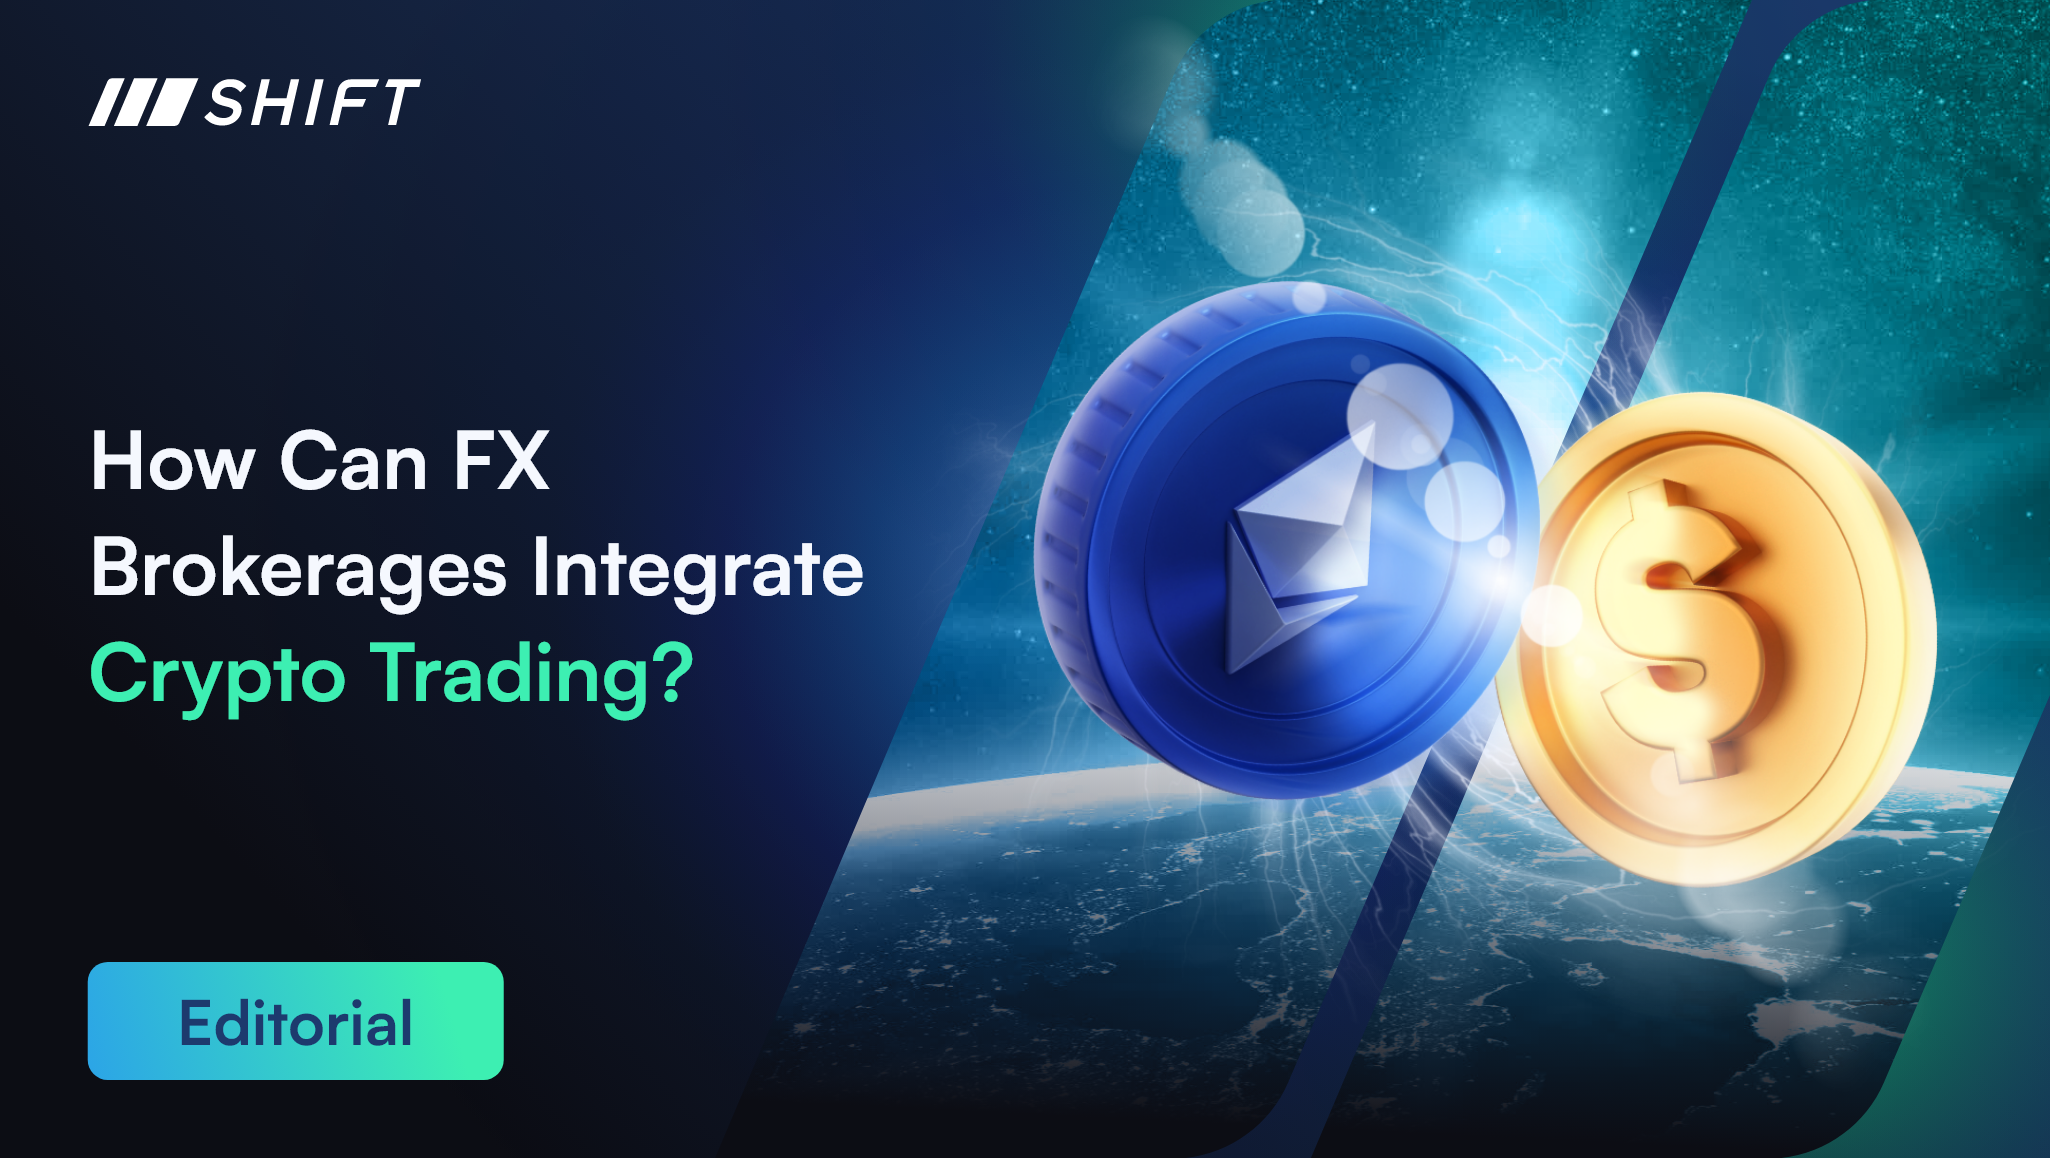 Learn how FX brokerages can integrate crypto trading in a step-by-step breakdown.